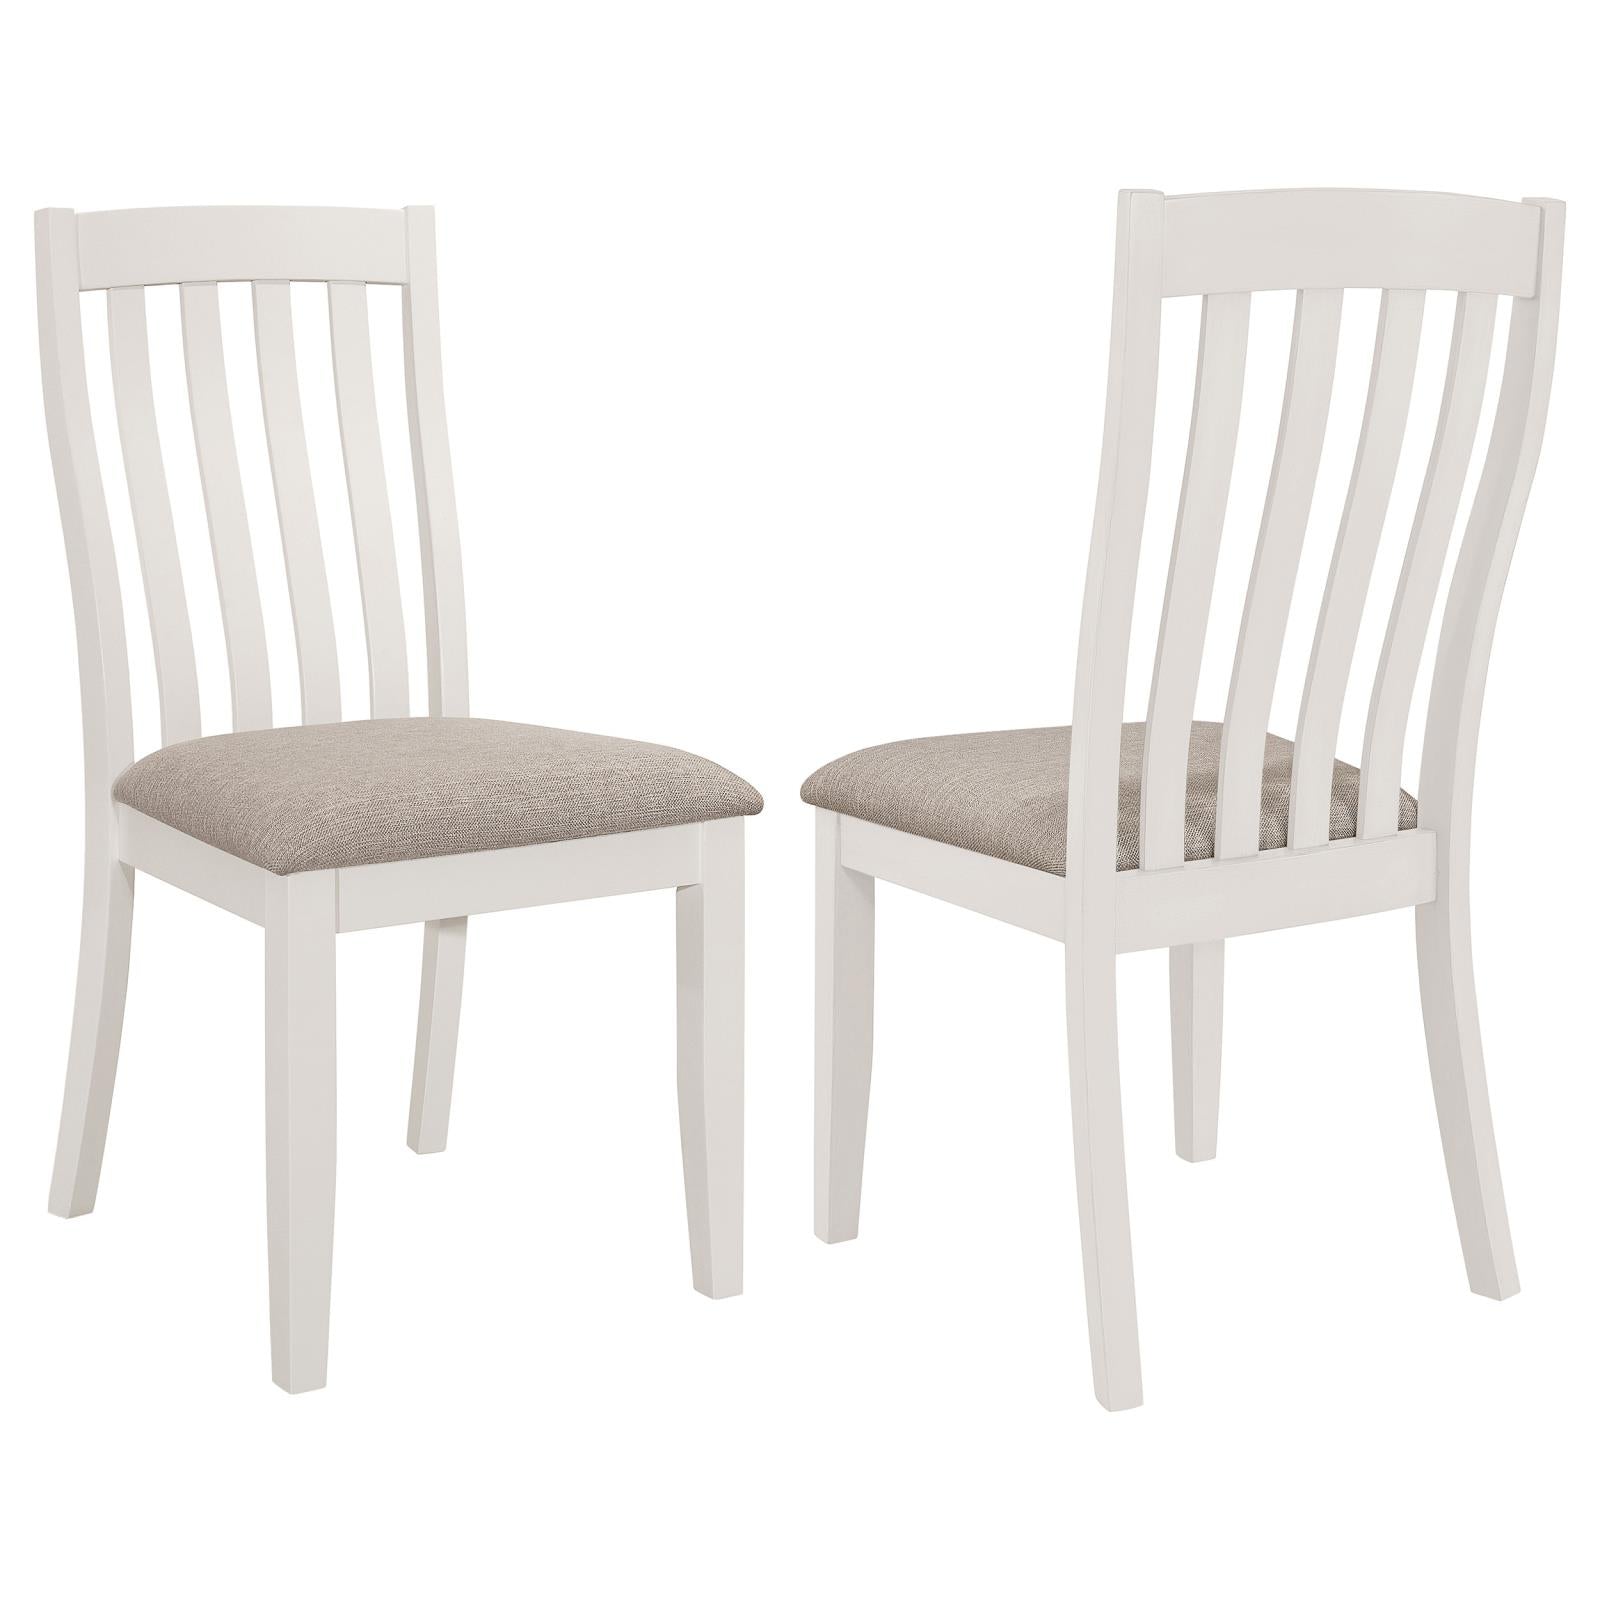 Nogales Collection Nogales Vertical Slat Back Dining Side Chair Off White (Set Of 2) 122302